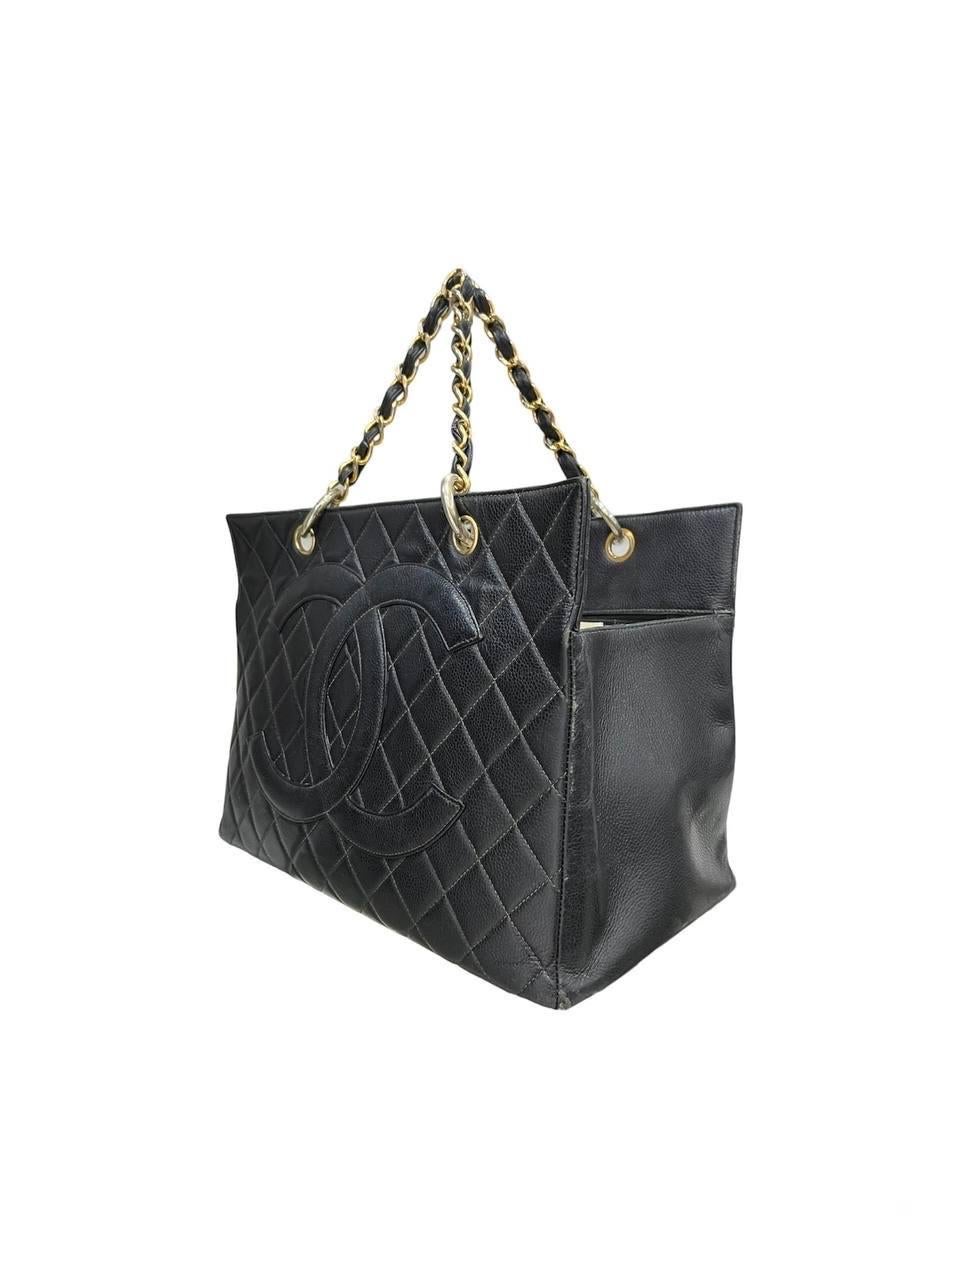 1990 Chanel GST Grand Shopping Tote Black Caviar Leather Top Handle Bag In Good Condition For Sale In Torre Del Greco, IT